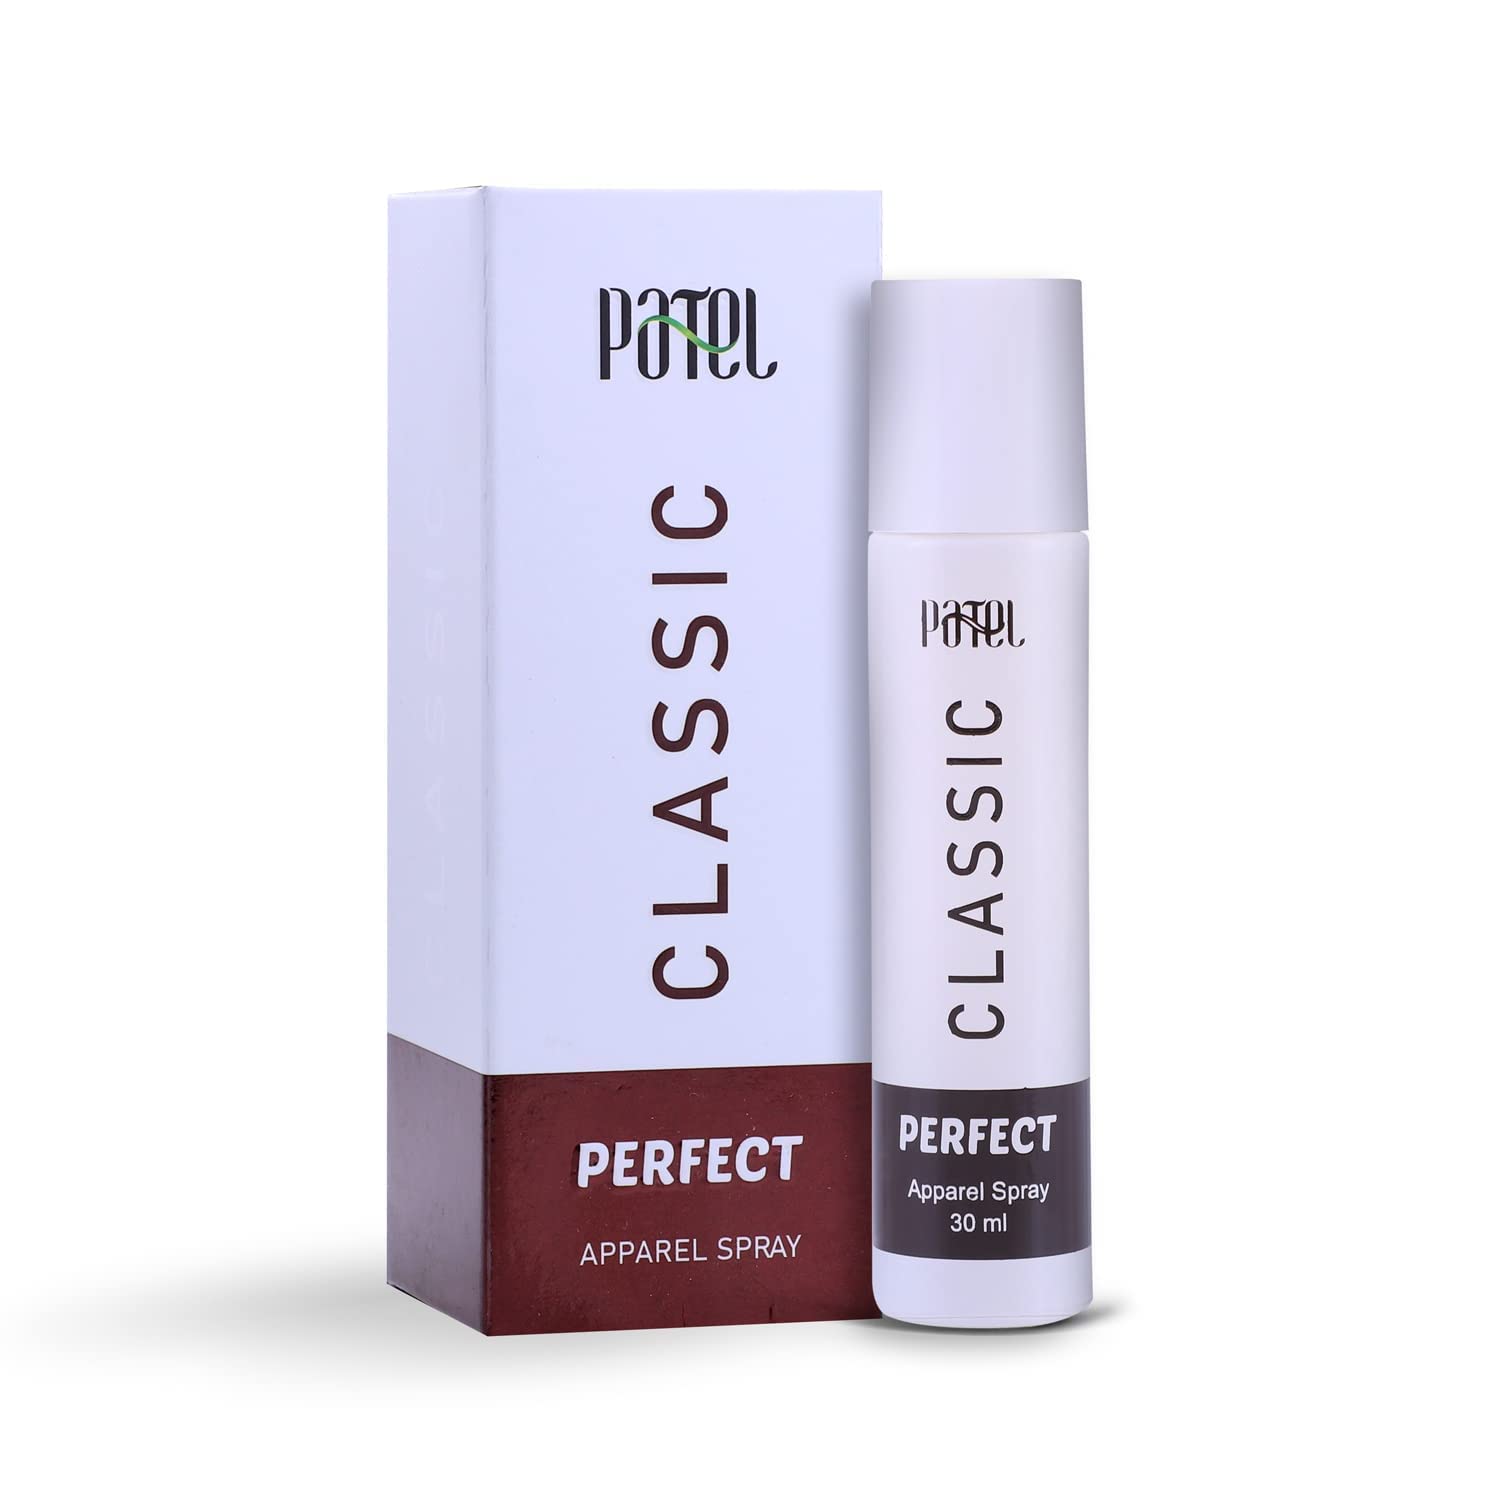 Buy online PATEL PERFECT Premium Extra Long Lasting Perfume For Men & Women at the best price in india 